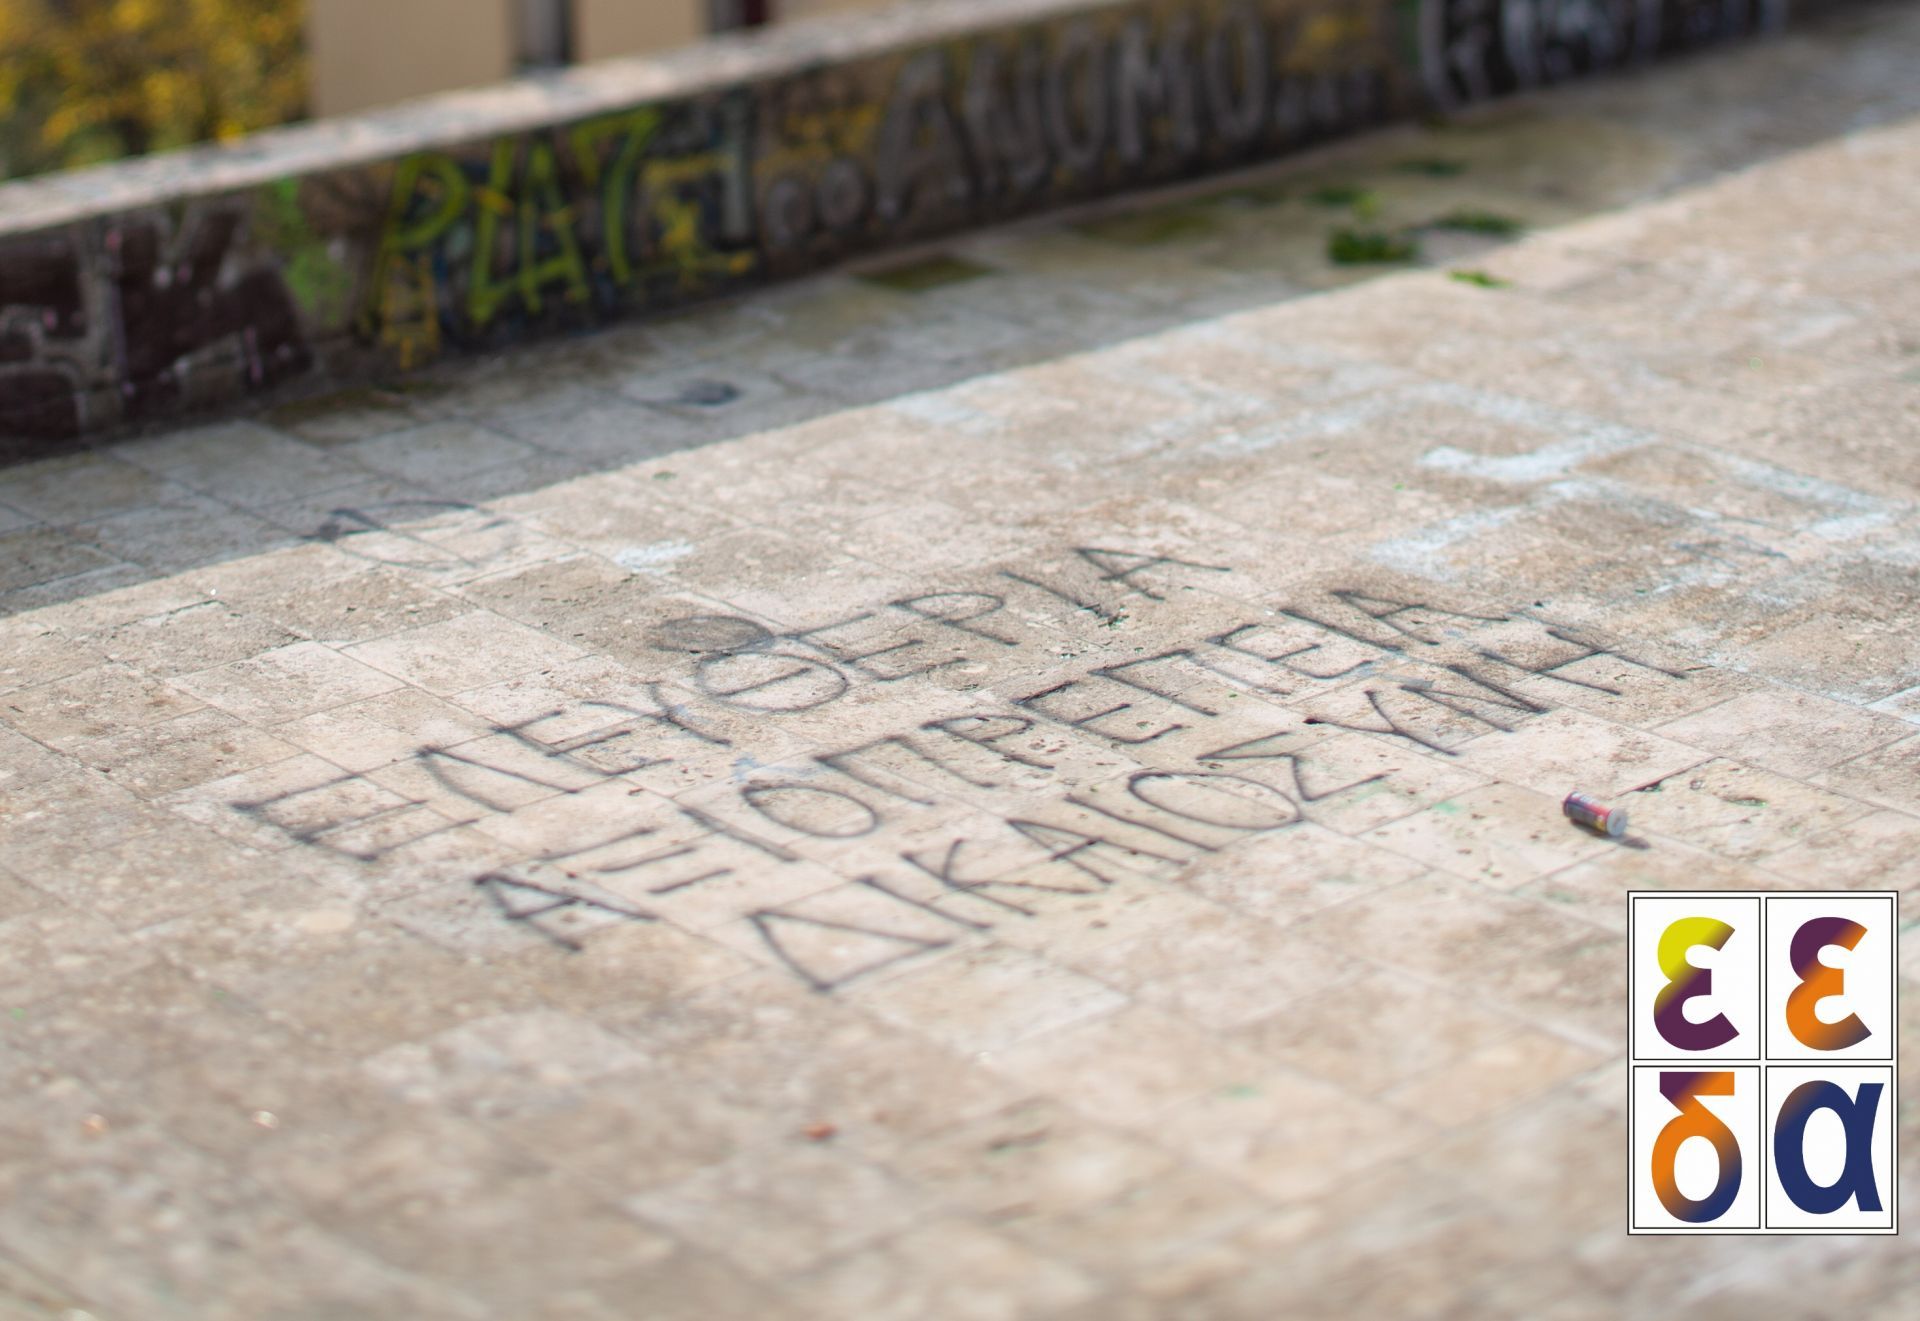 "Dignity, Freedom and Justice" written with a spray on the ground